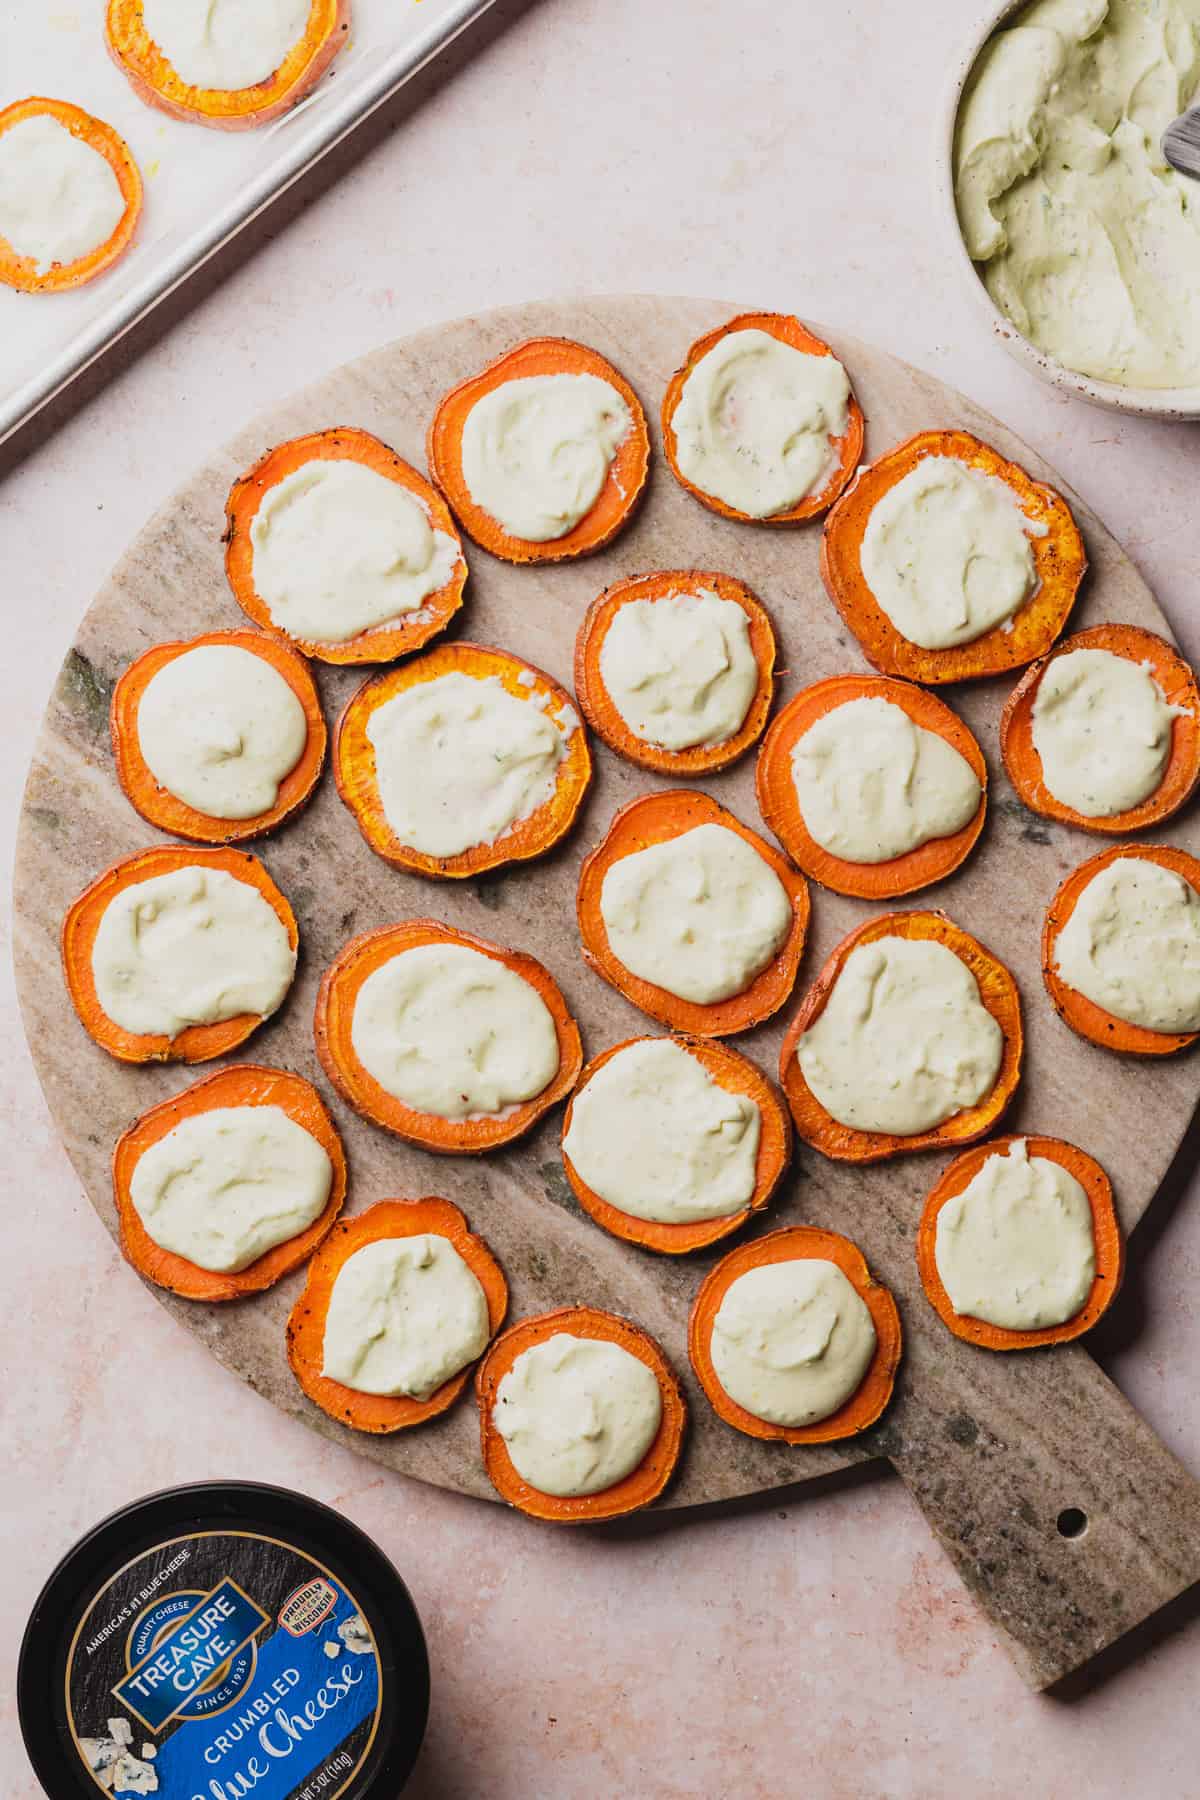 sweet potato rounds with blue cheese on top